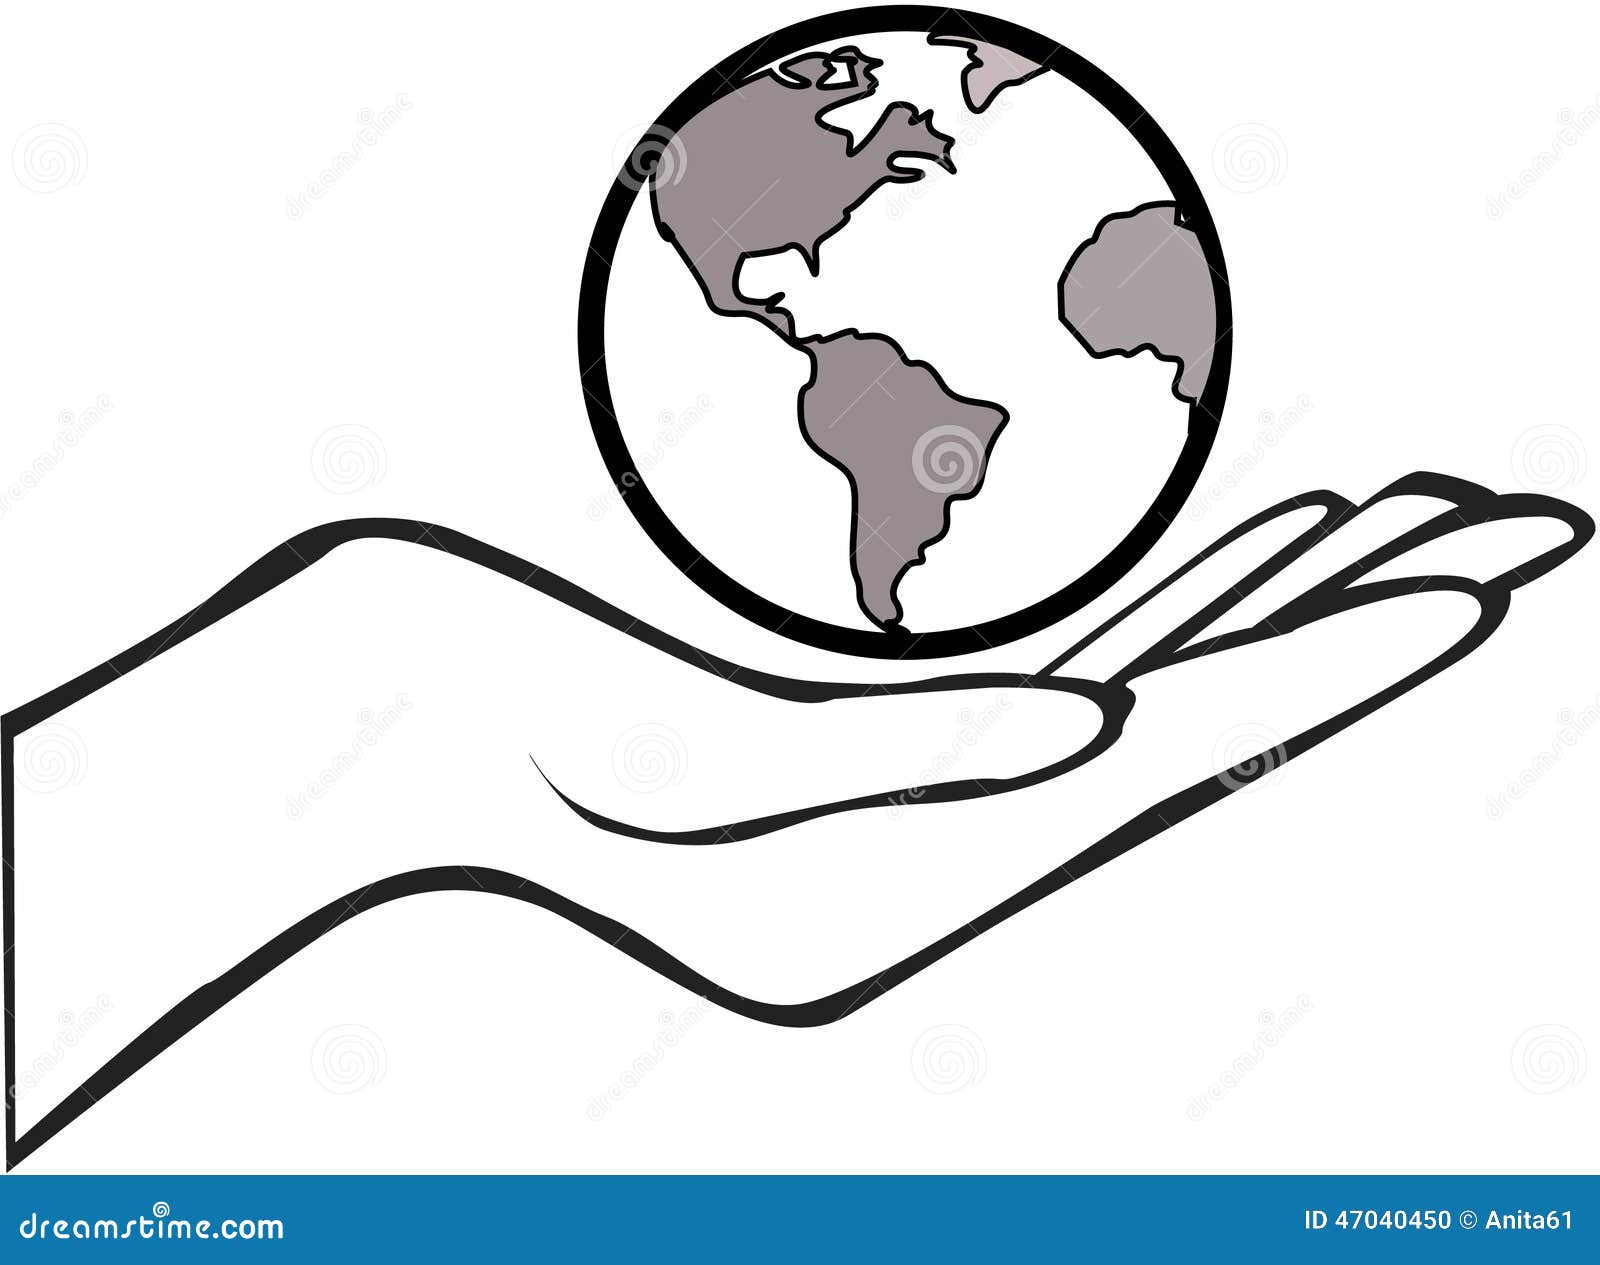 clipart earth black and white - photo #28